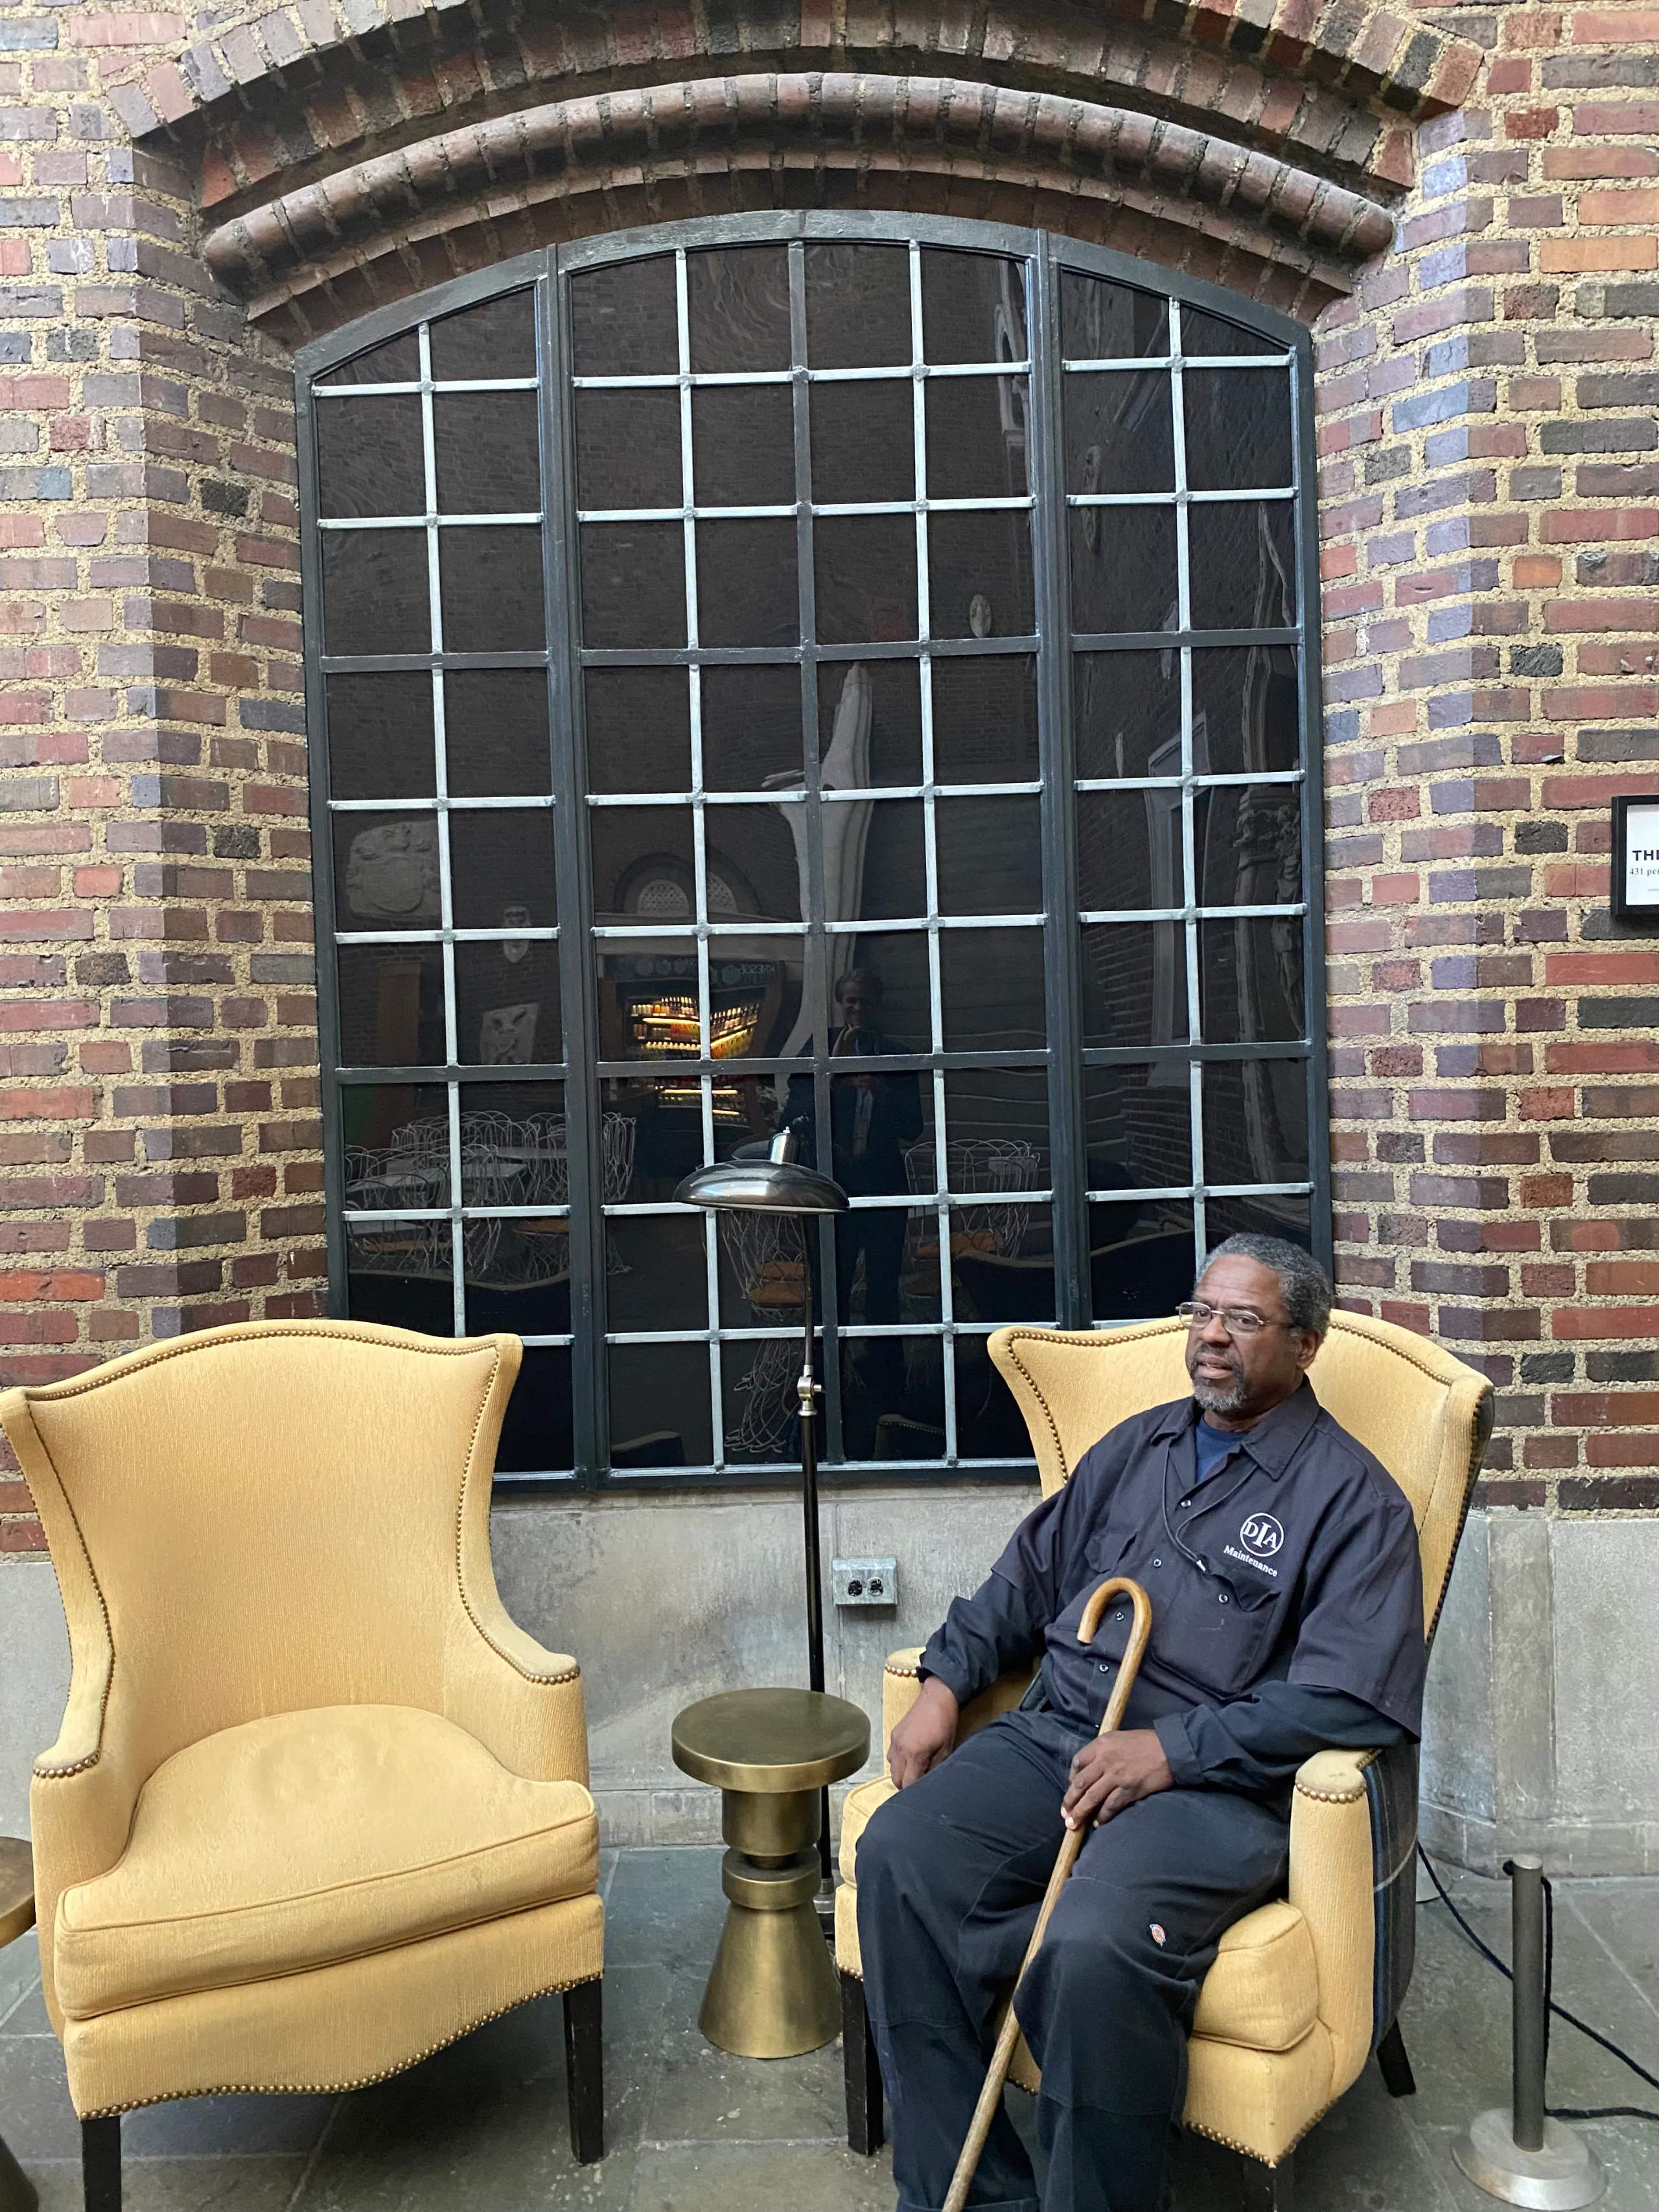 James Burts sits on a yellow winged-back chair in Kresge Court.